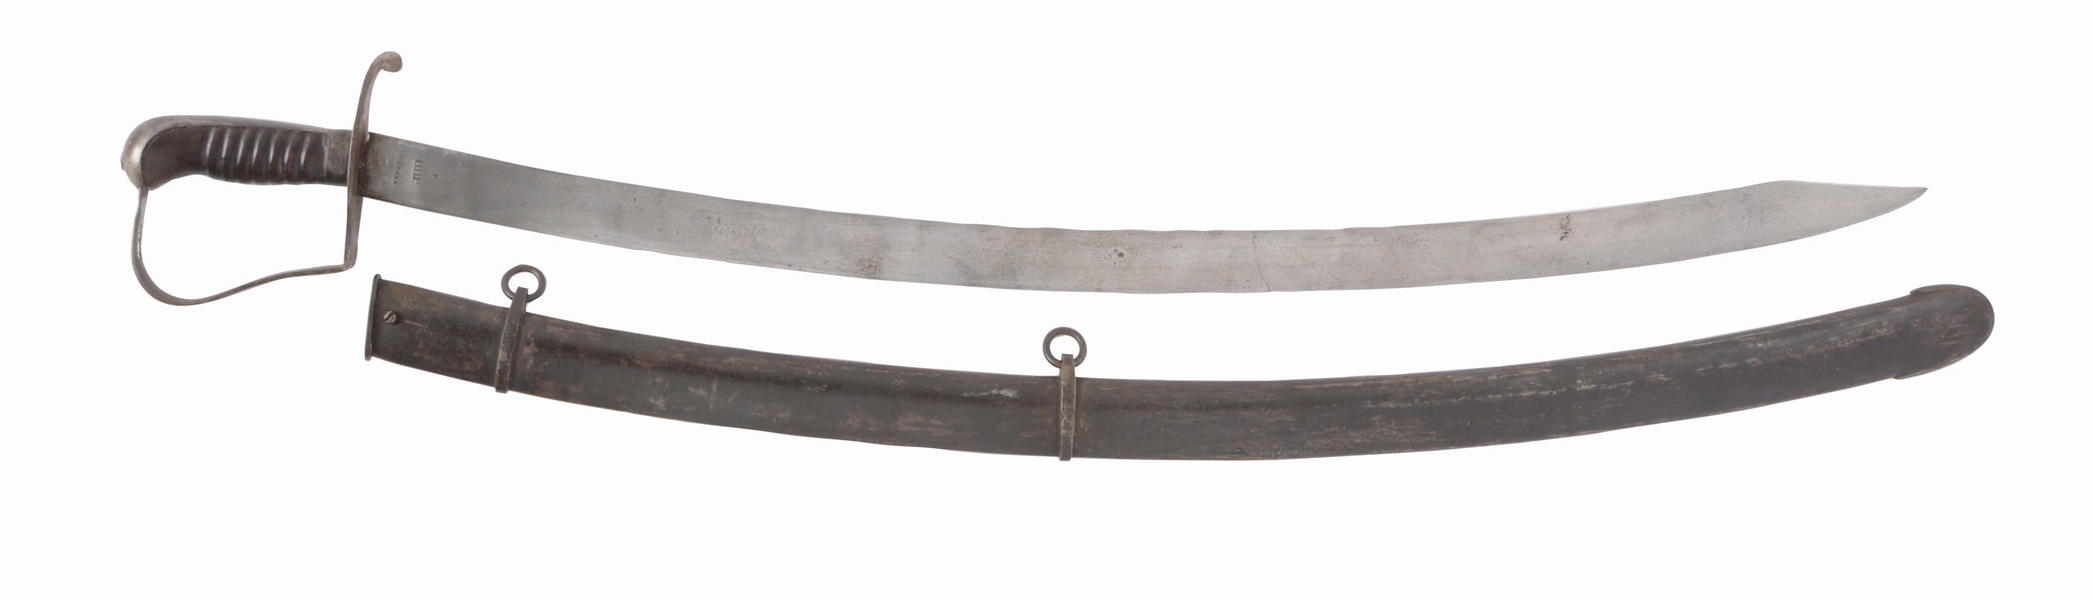 EXTREMELY RARE STARR MODEL 1813 CAVALRY SABER, MARKED "S. CAROLINA" WITH SCABBARD.